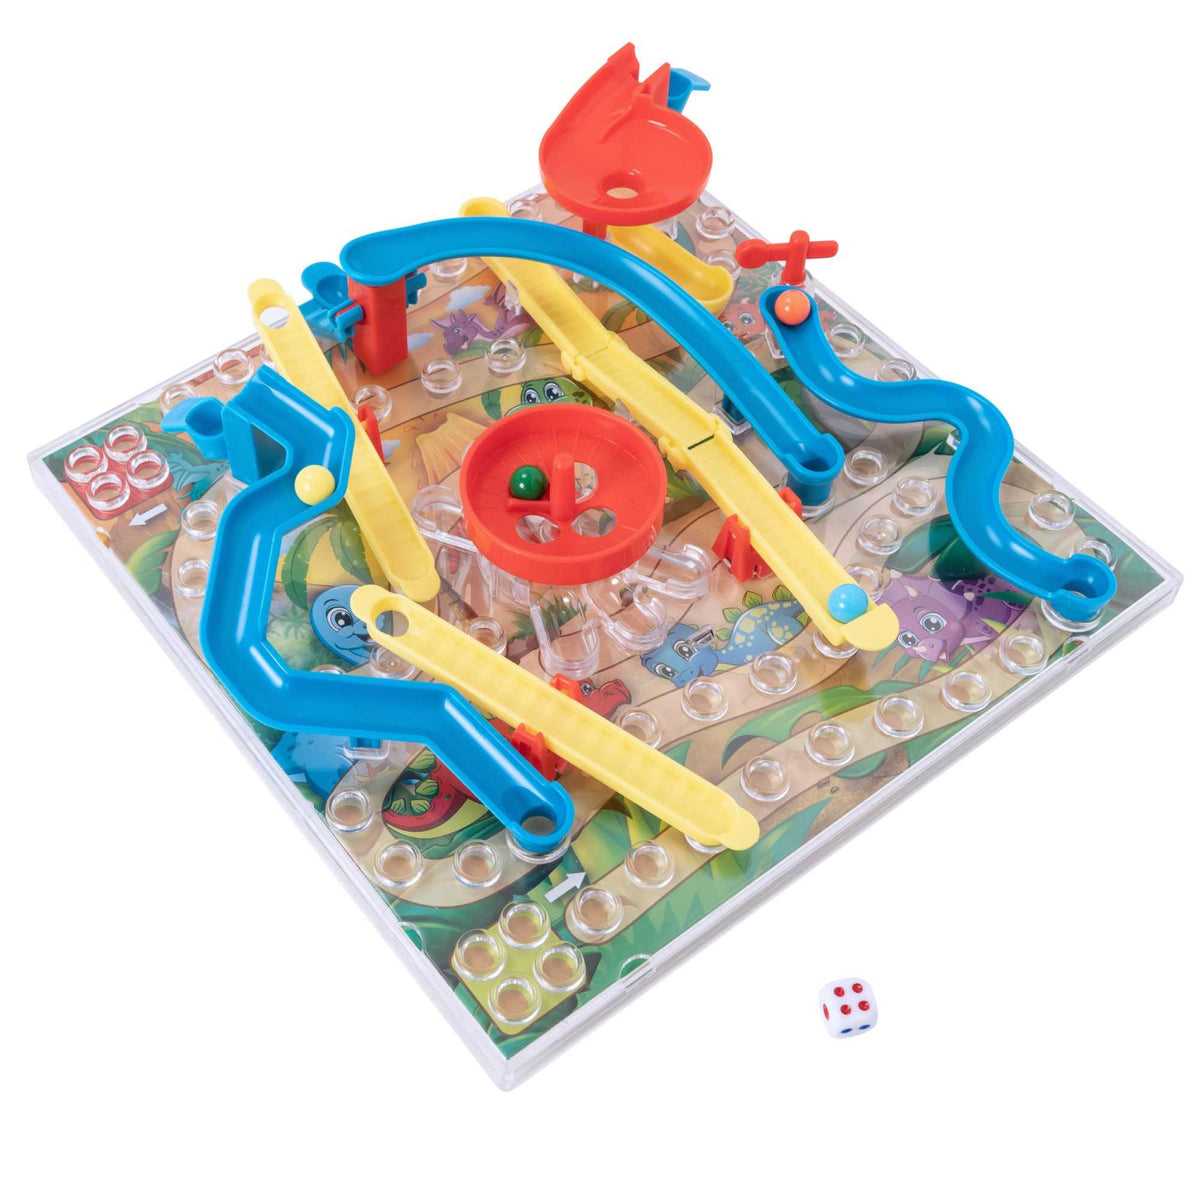 Snakes and Ladders Dinosaur Family Board Game, 3D toys, Educations games, jurassic park games, Strategy Game, Games night, Childrens dinosaur present